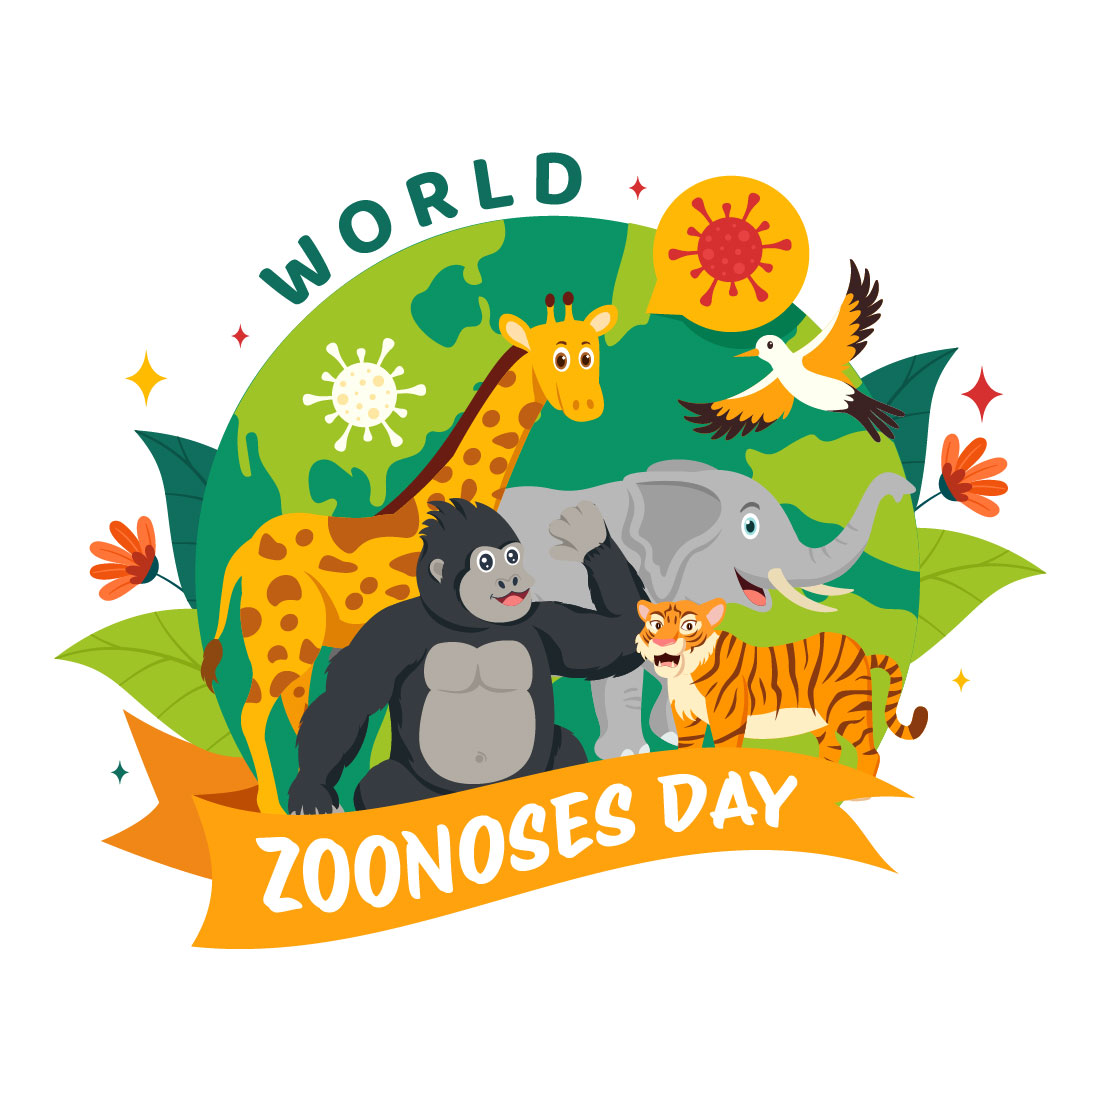 9 World Zoonoses Day Illustration preview image.